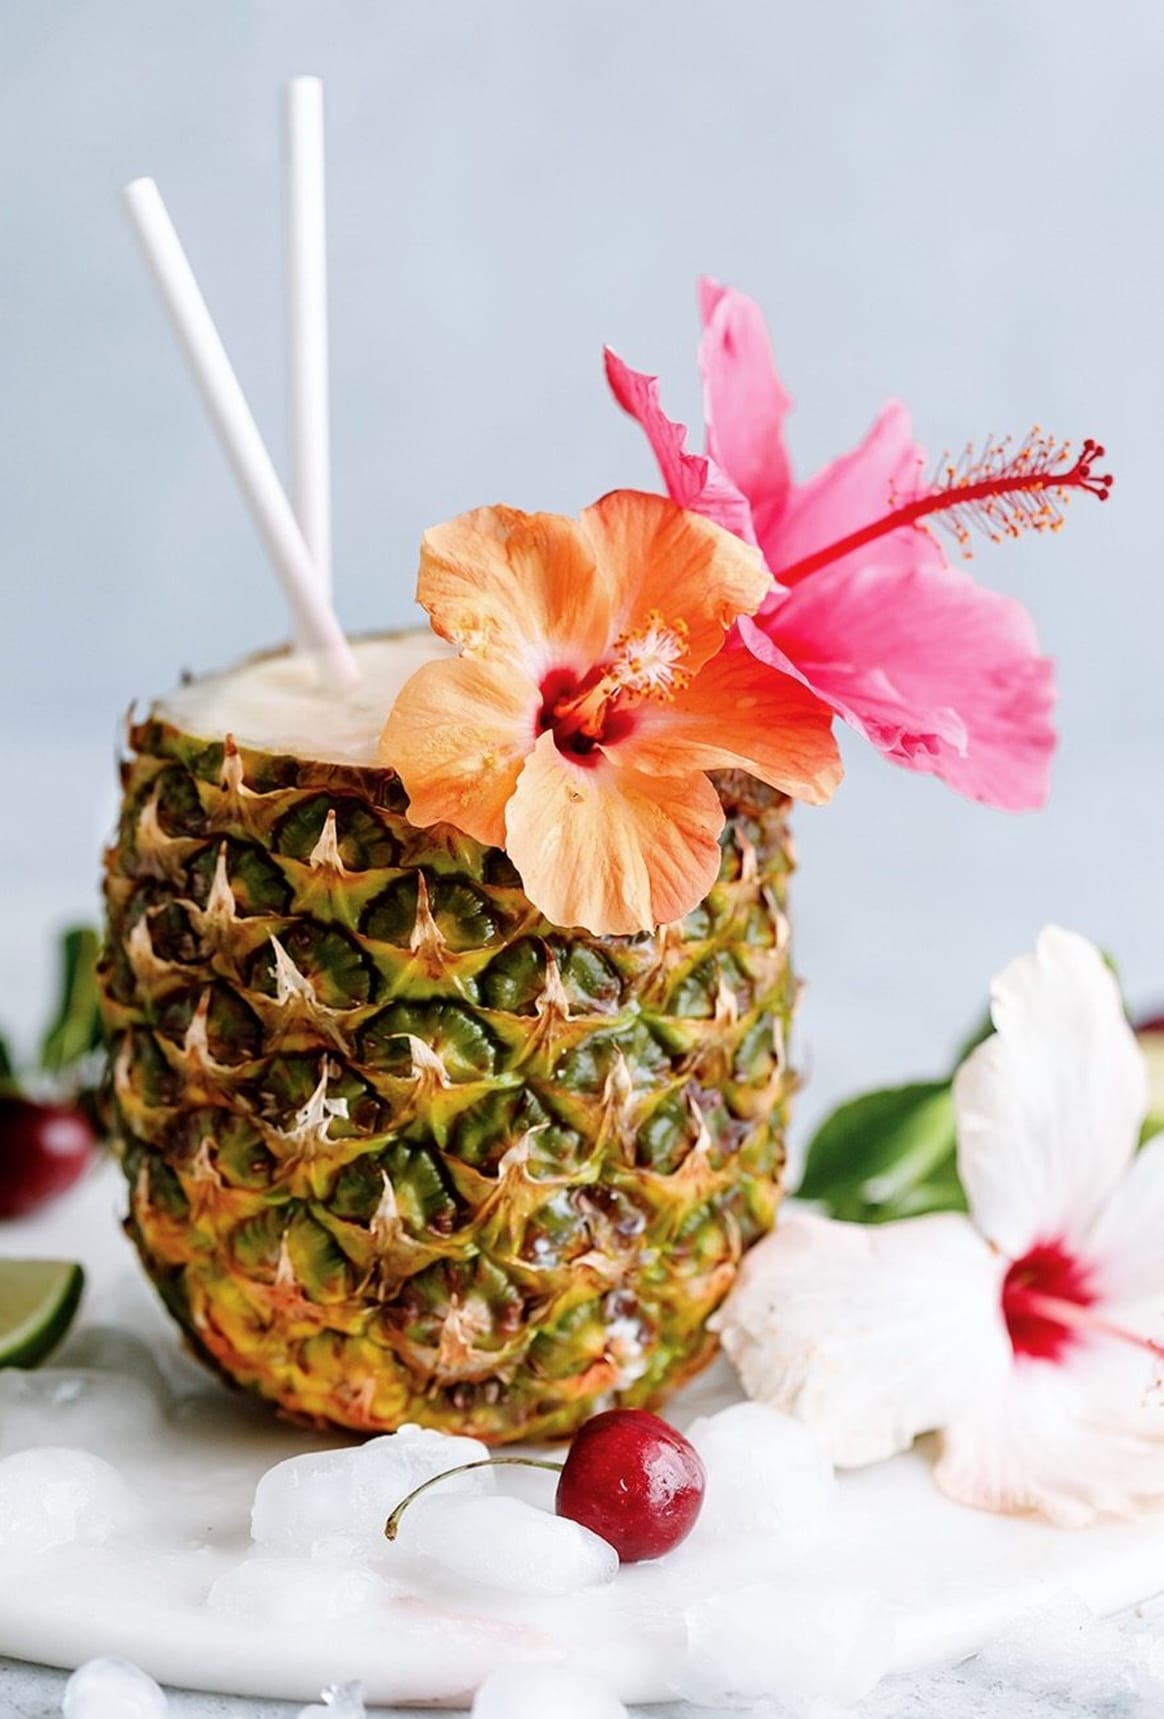 The Best Pina Colada - Yoga of Cooking